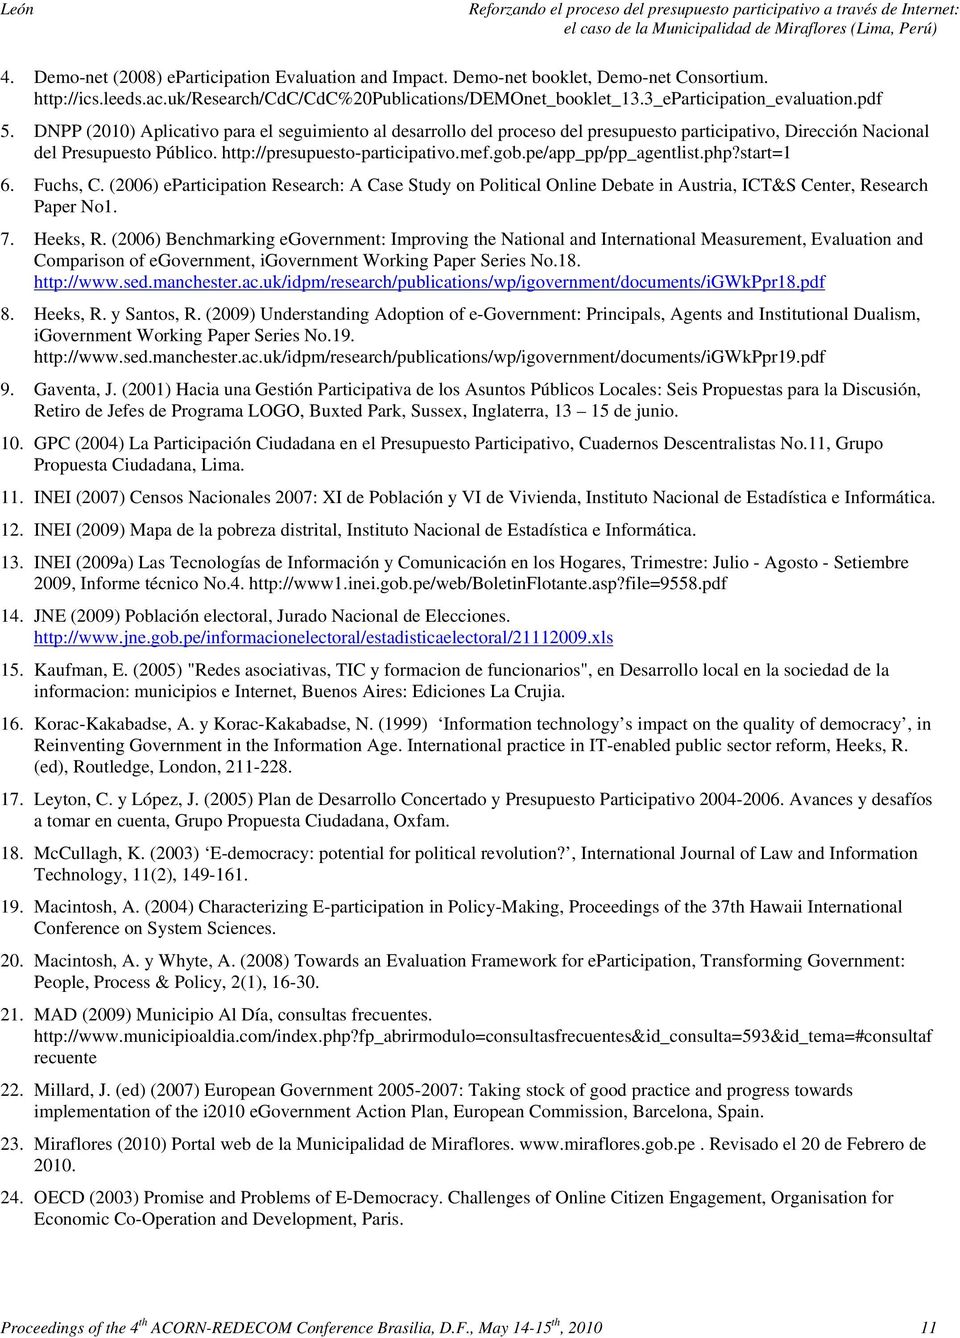 pe/app_pp/pp_agentlist.php?start=1 6. Fuchs, C. (2006) eparticipation Research: A Case Study on Political Online Debate in Austria, ICT&S Center, Research Paper No1. 7. Heeks, R.